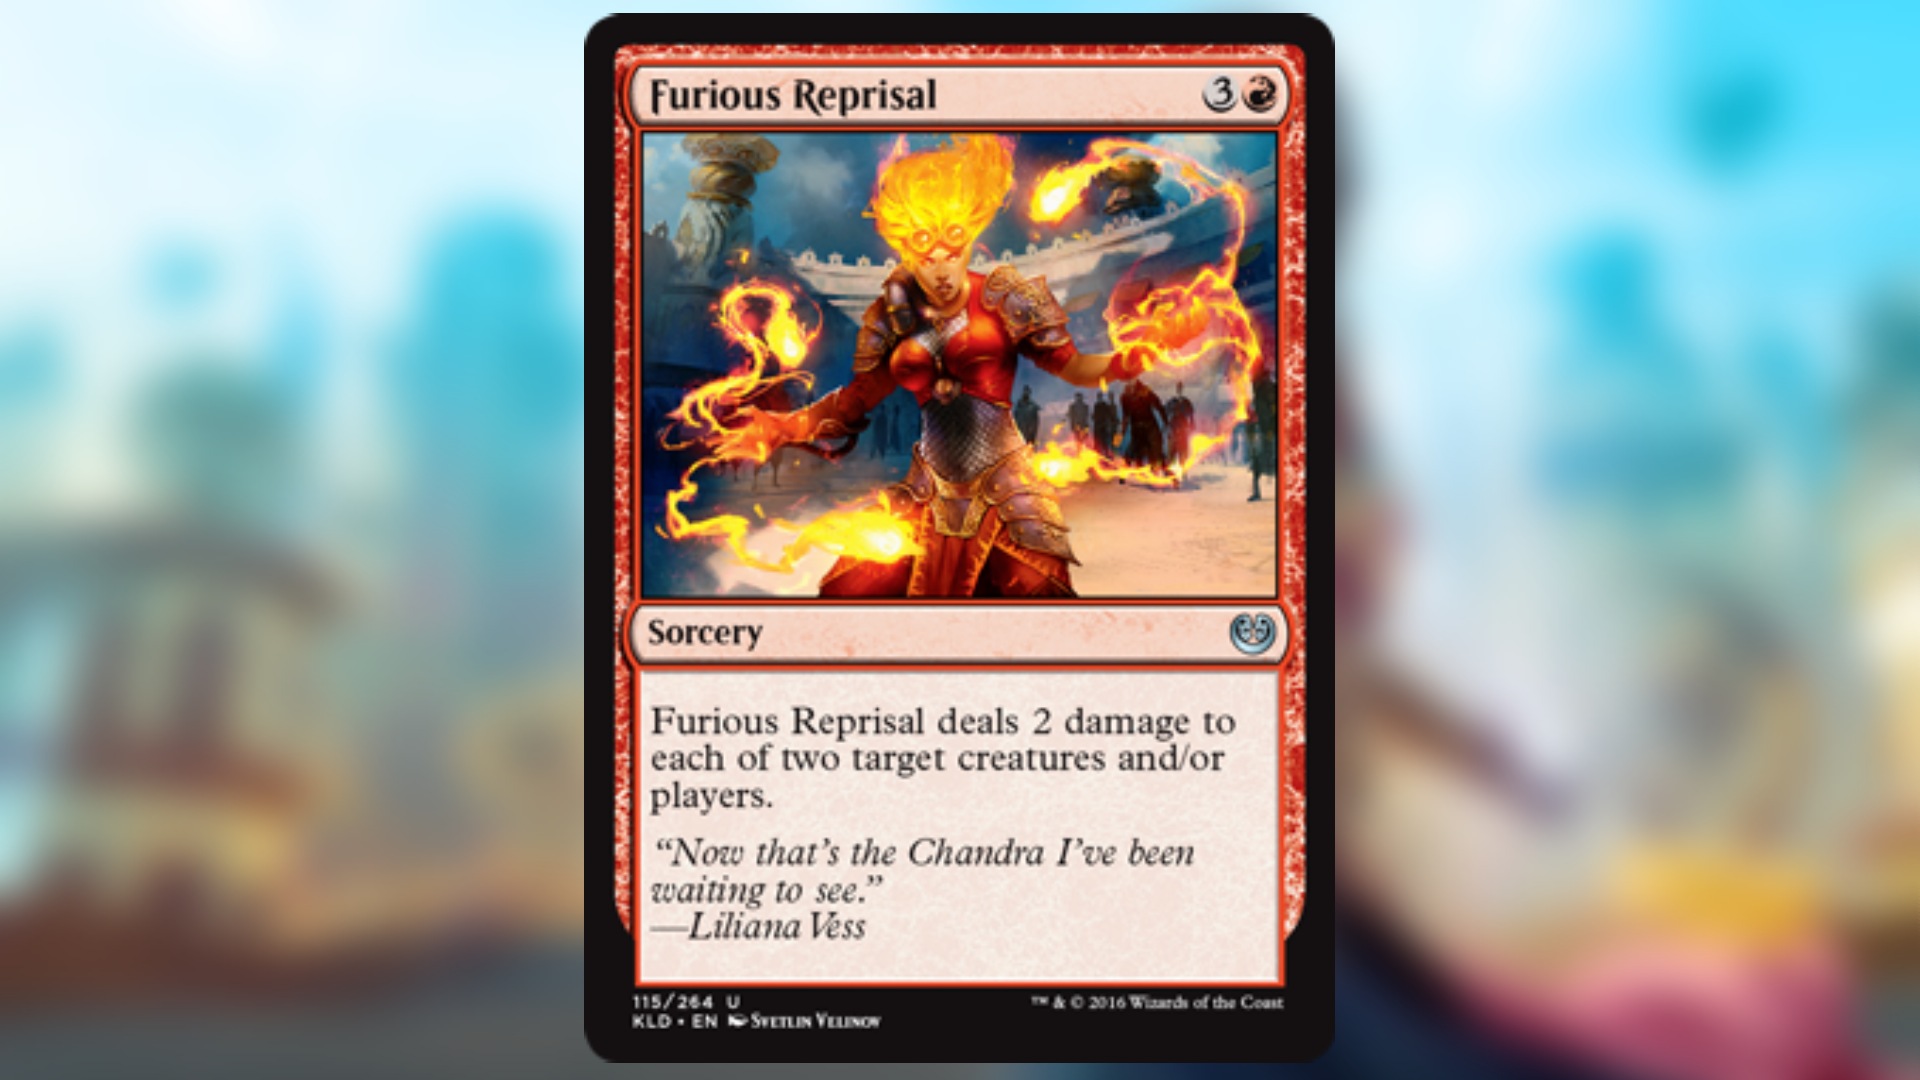 magic the gathering card in red featuring art of a flaming mage surrounded by fire